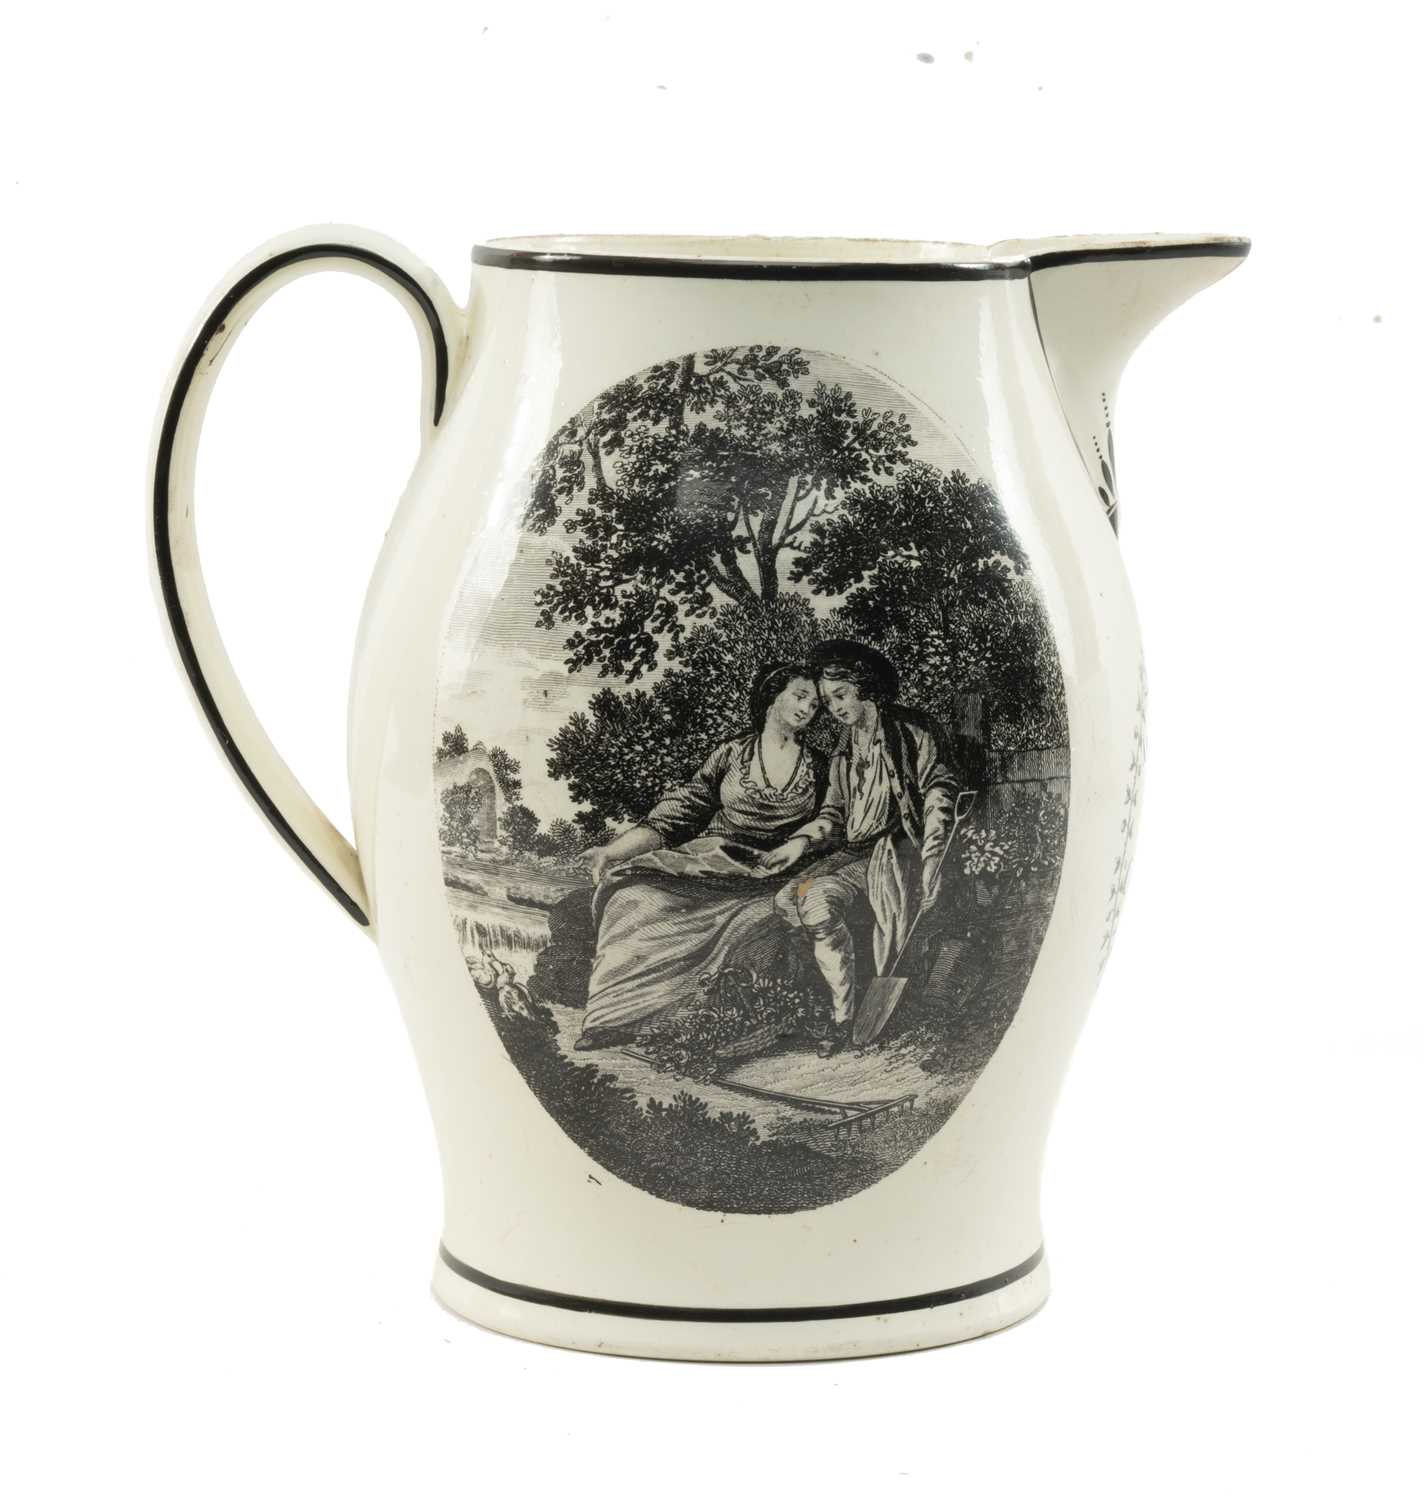 LIVERPOOL CREAMWARE 'NAMED' JUG OF CARDIGANSHIRE INTEREST c.1810, probably Herculaneum, printed in - Image 2 of 4